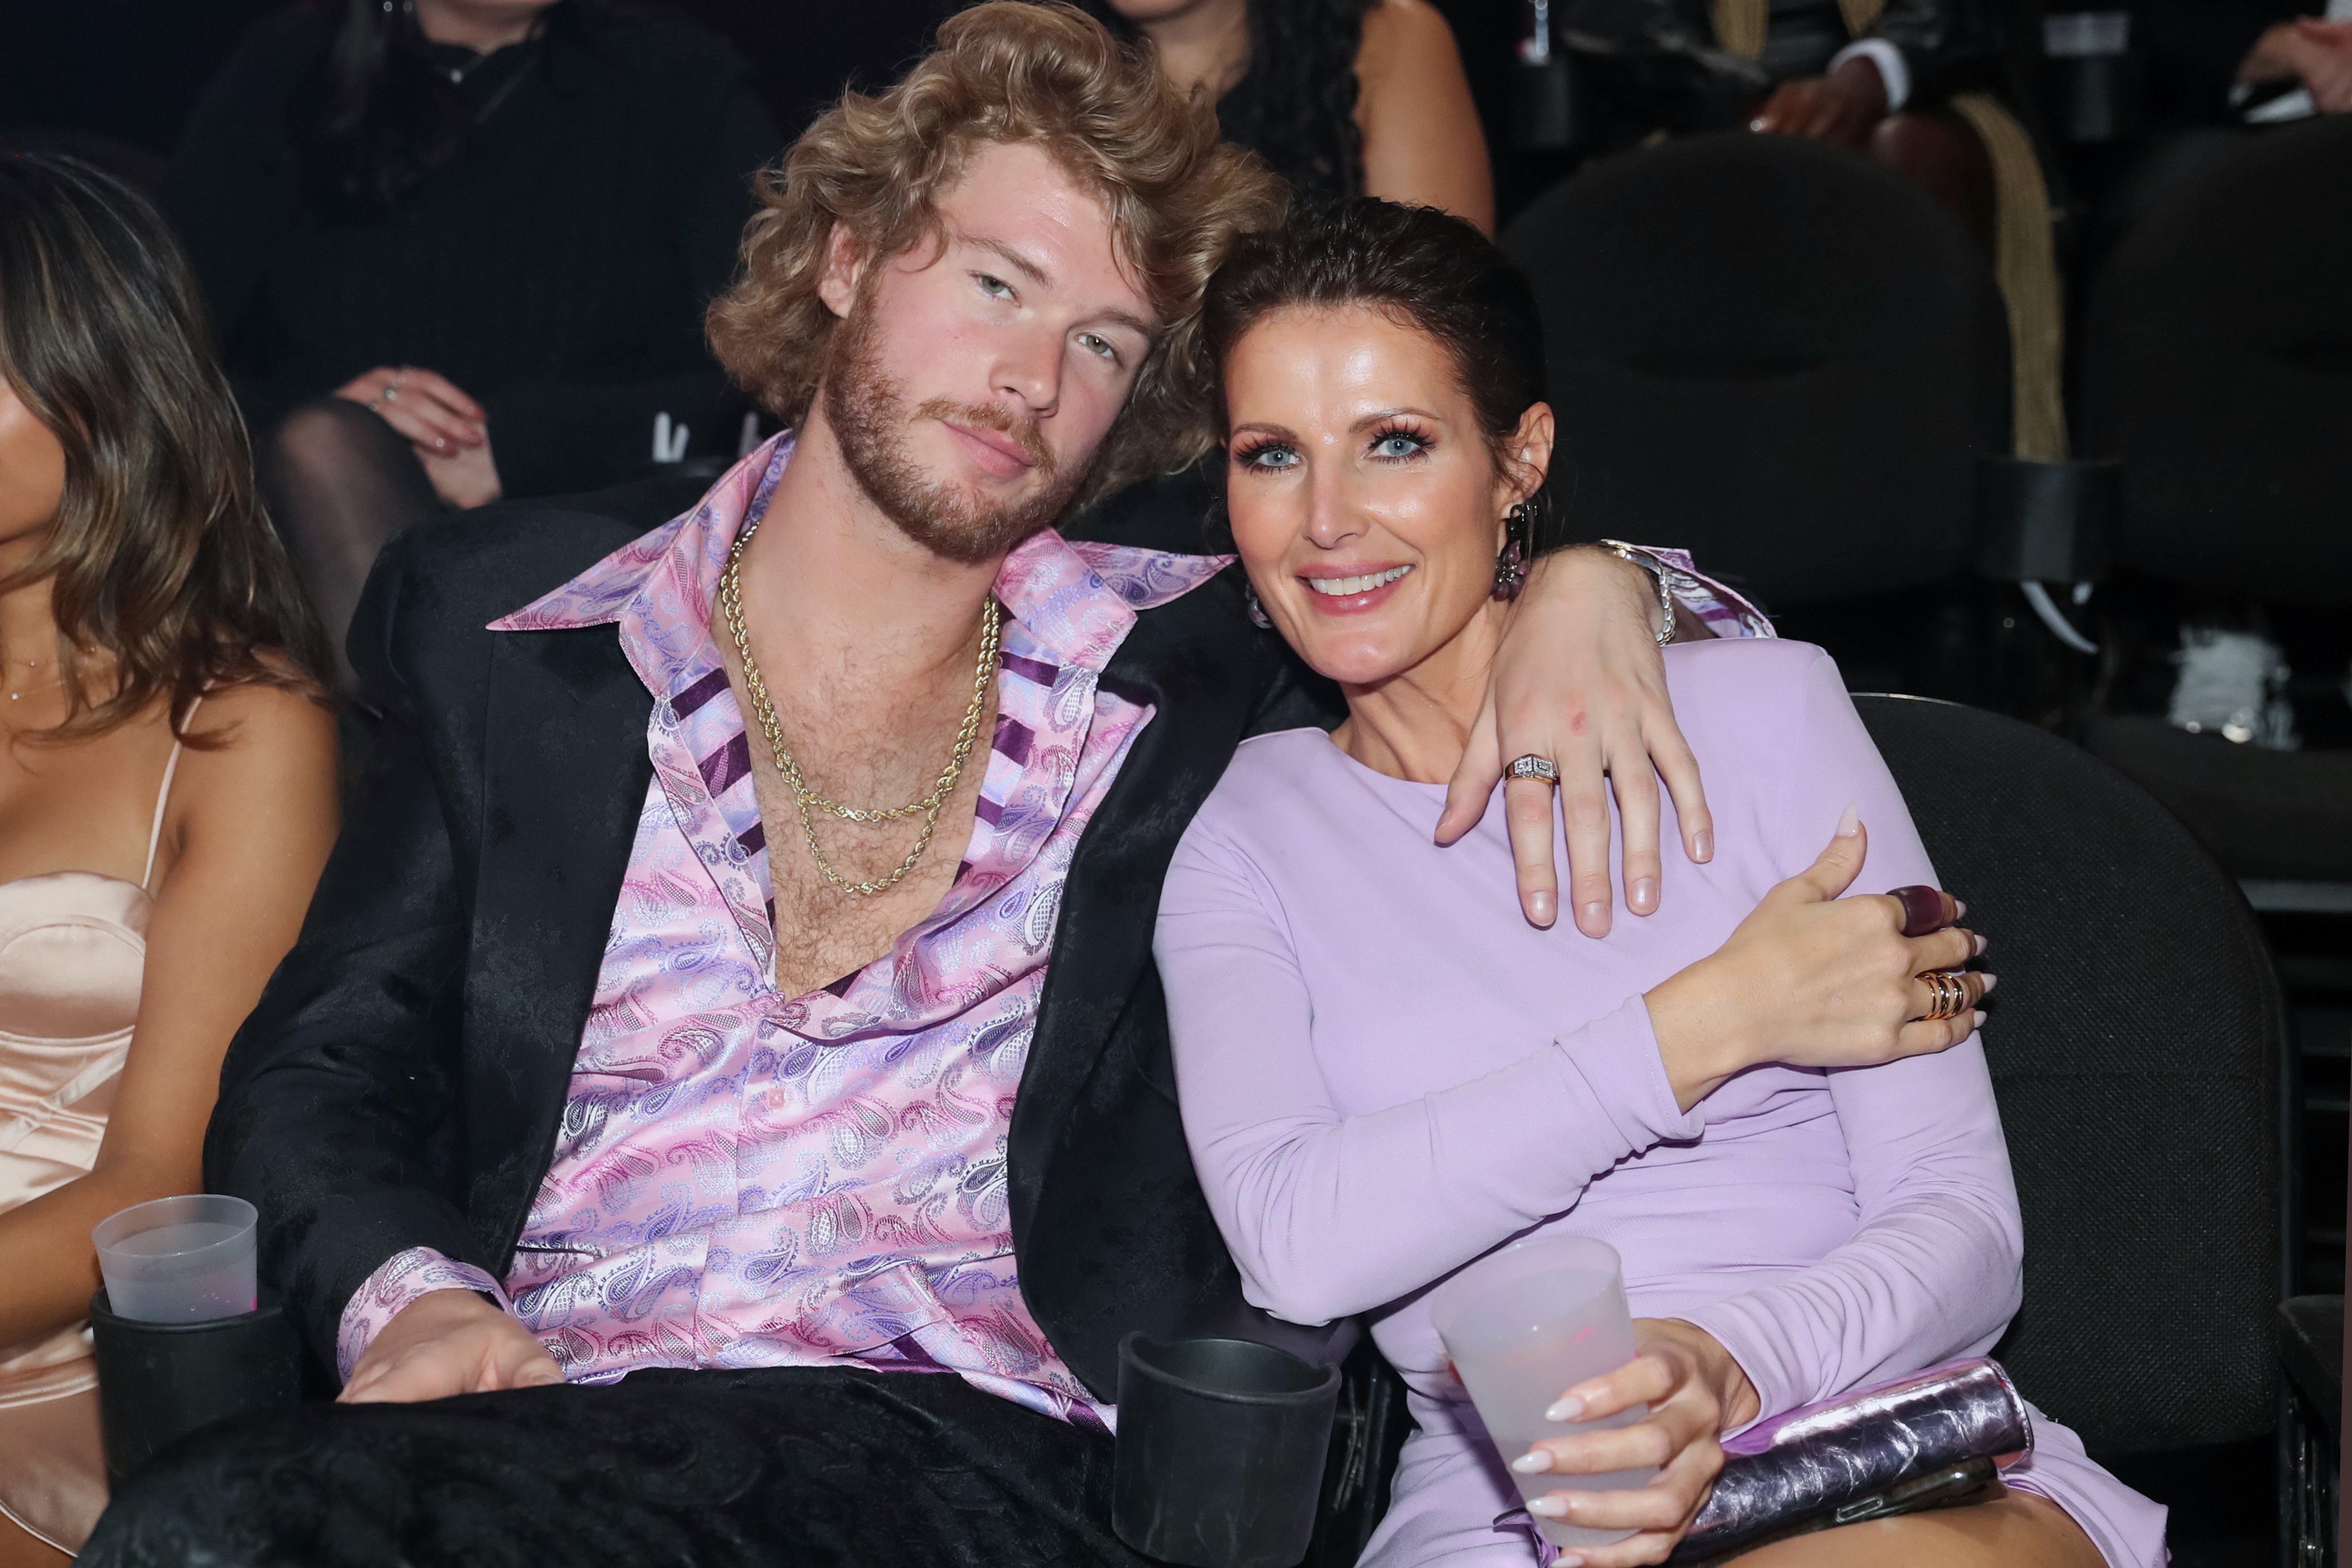 Yung Gravy and Sheri Nicole Easterling during the 2022 MTV VMAs at Prudential Center on August 28, 2022, in Newark, New Jersey. | Source: Getty Images